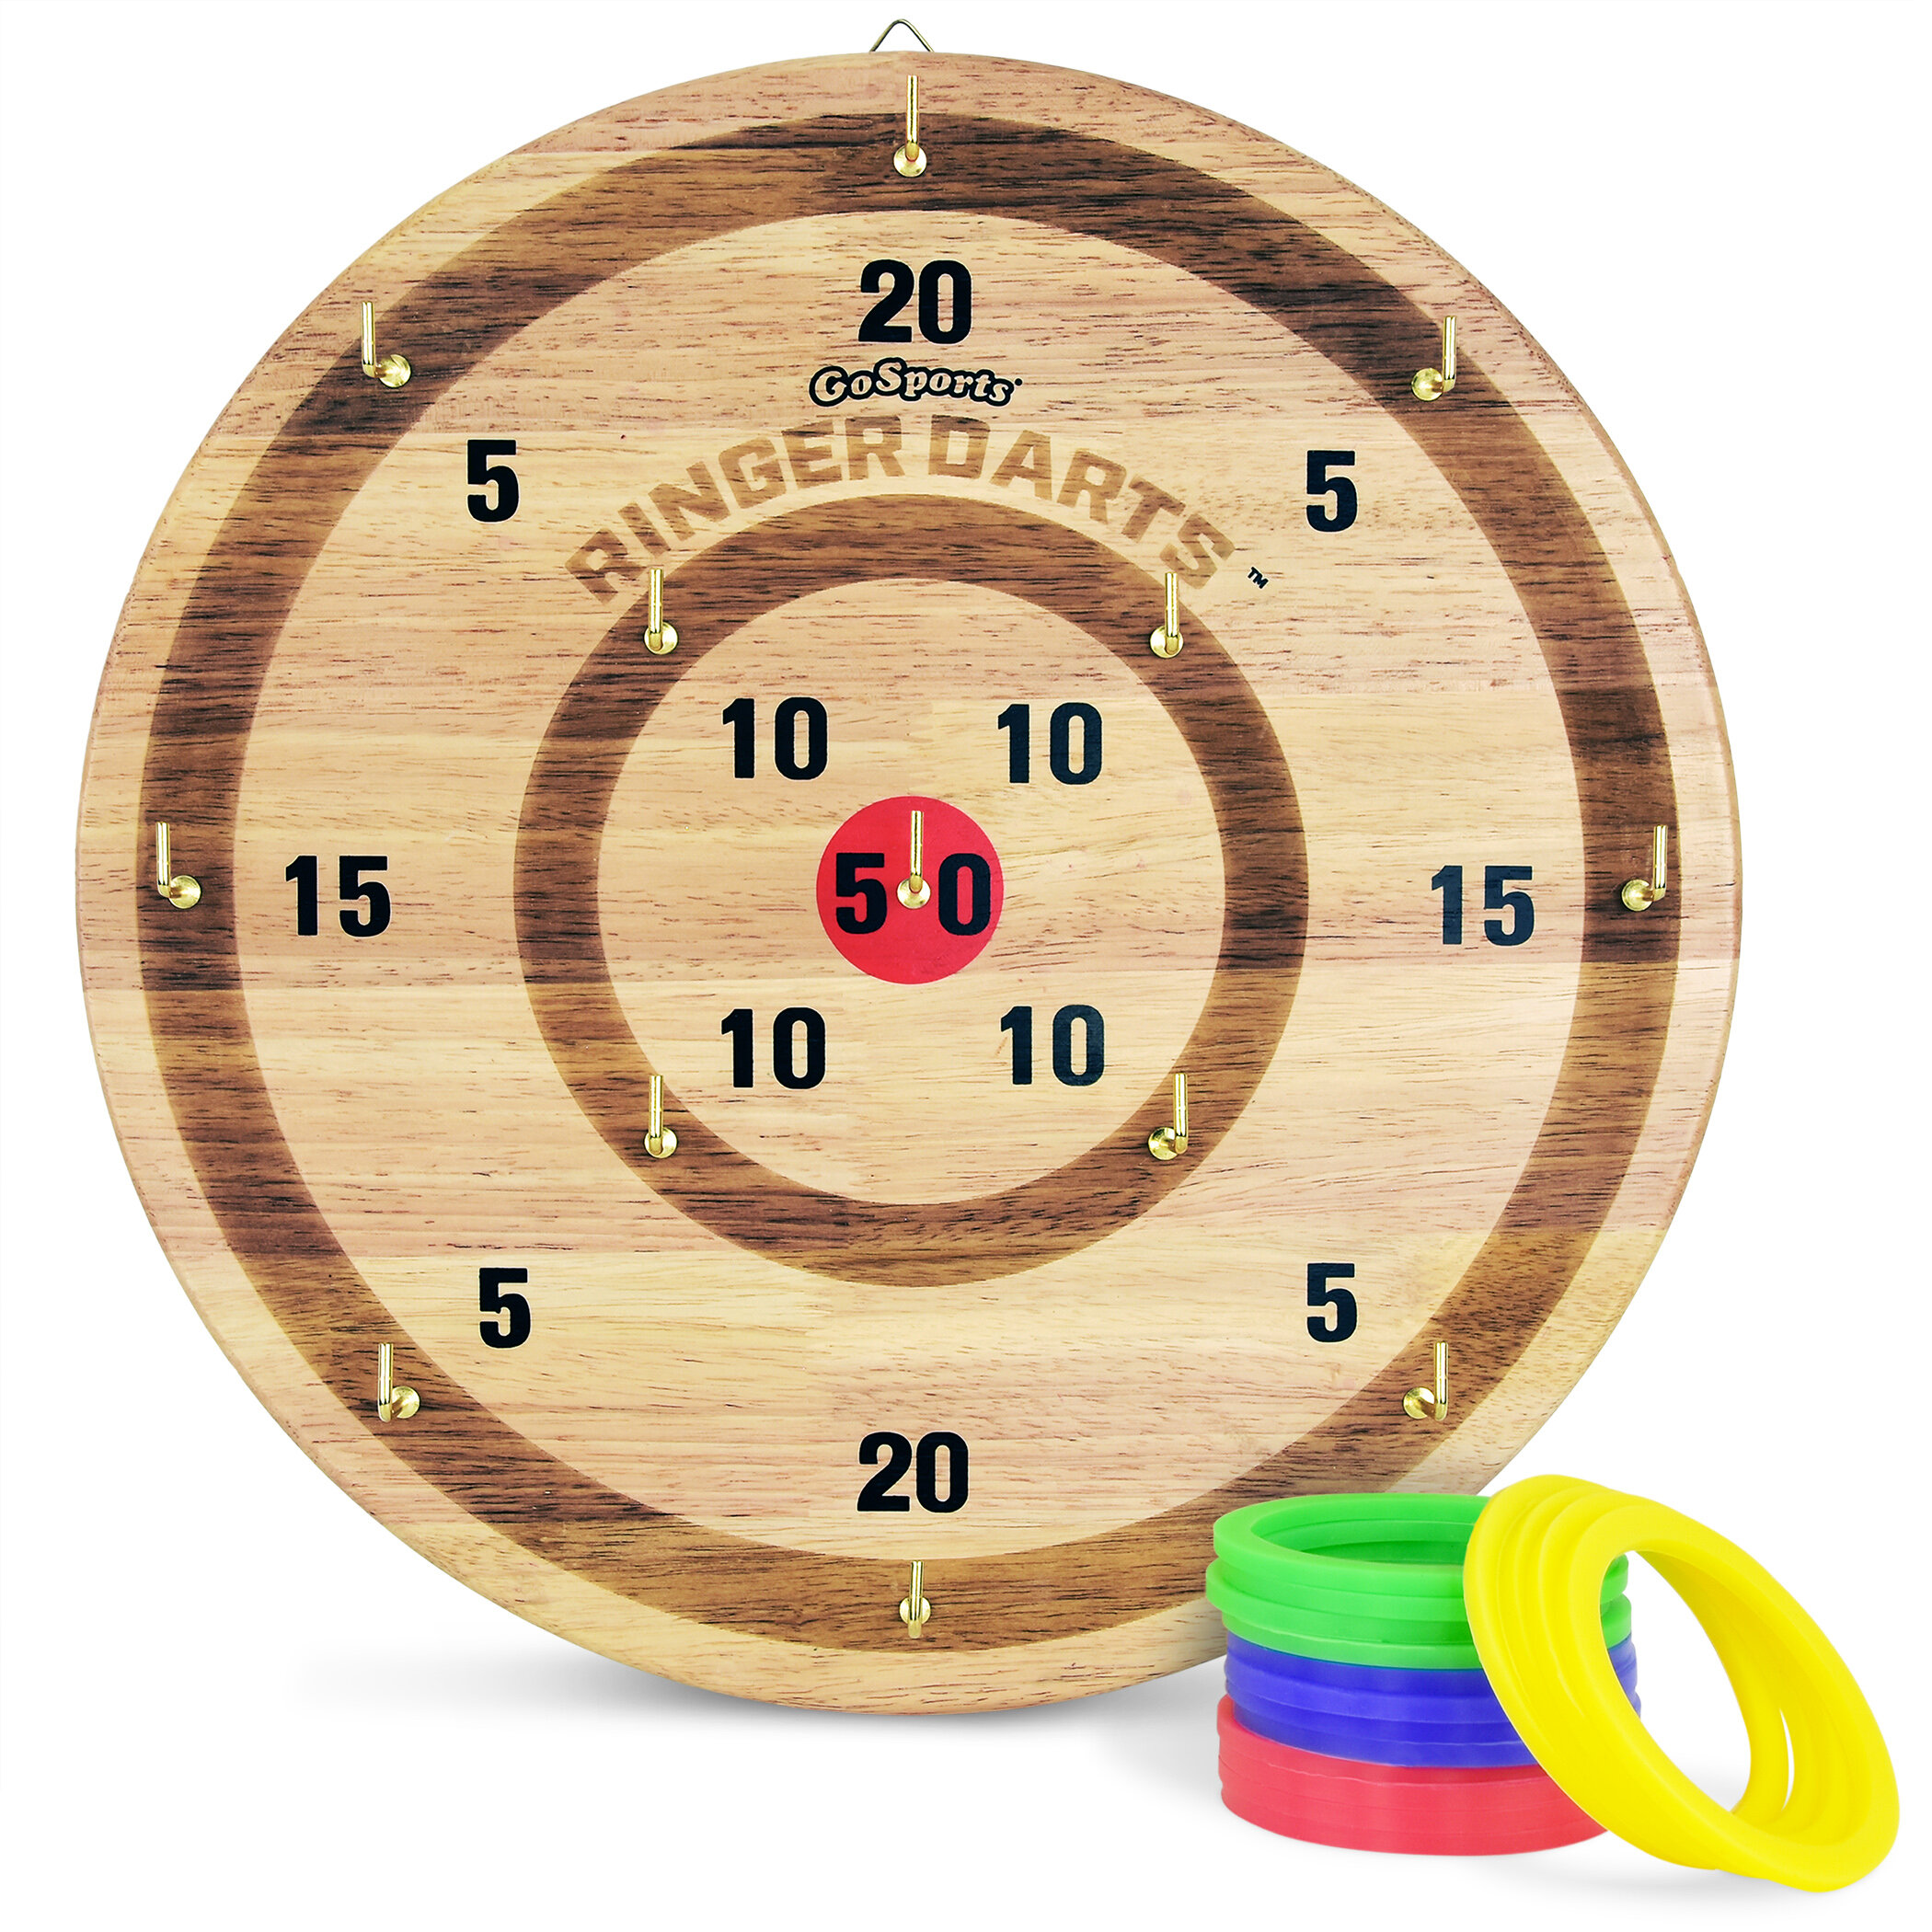 GoSports Premium Wooden Ring Toss Game With Carrying Case Great for All Ages for sale online 